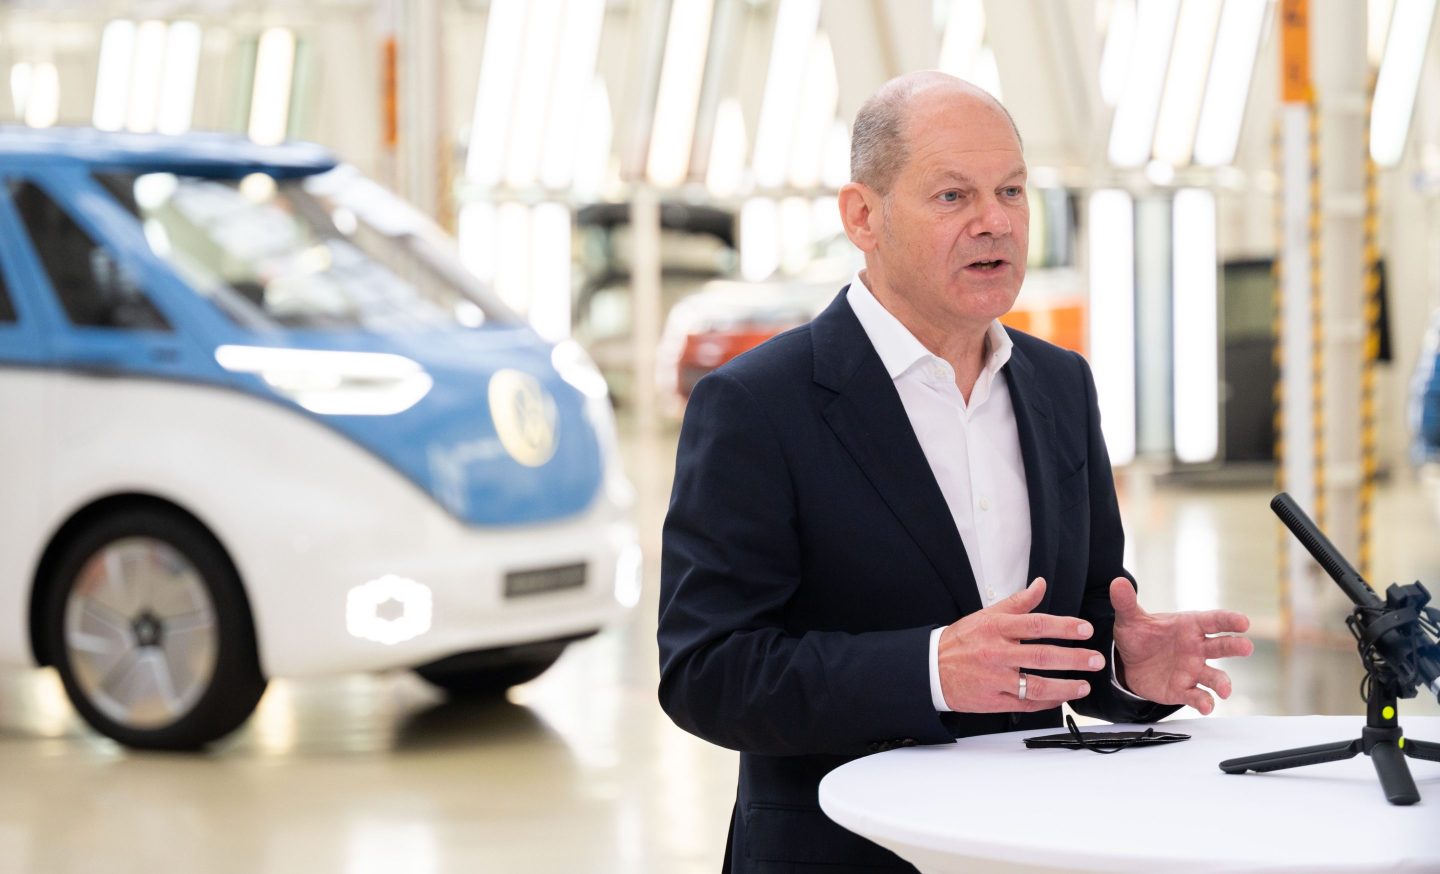 05 July 2021, Lower Saxony, Hanover: Olaf Scholz, SPD candidate for Chancellor and Federal Finance Minister, stands at a bar table during a visit to the Volkswagen Commercial Vehicles plant. Photo: Julian Stratenschulte/dpa (Photo by Julian Stratenschulte/picture alliance via Getty Images)